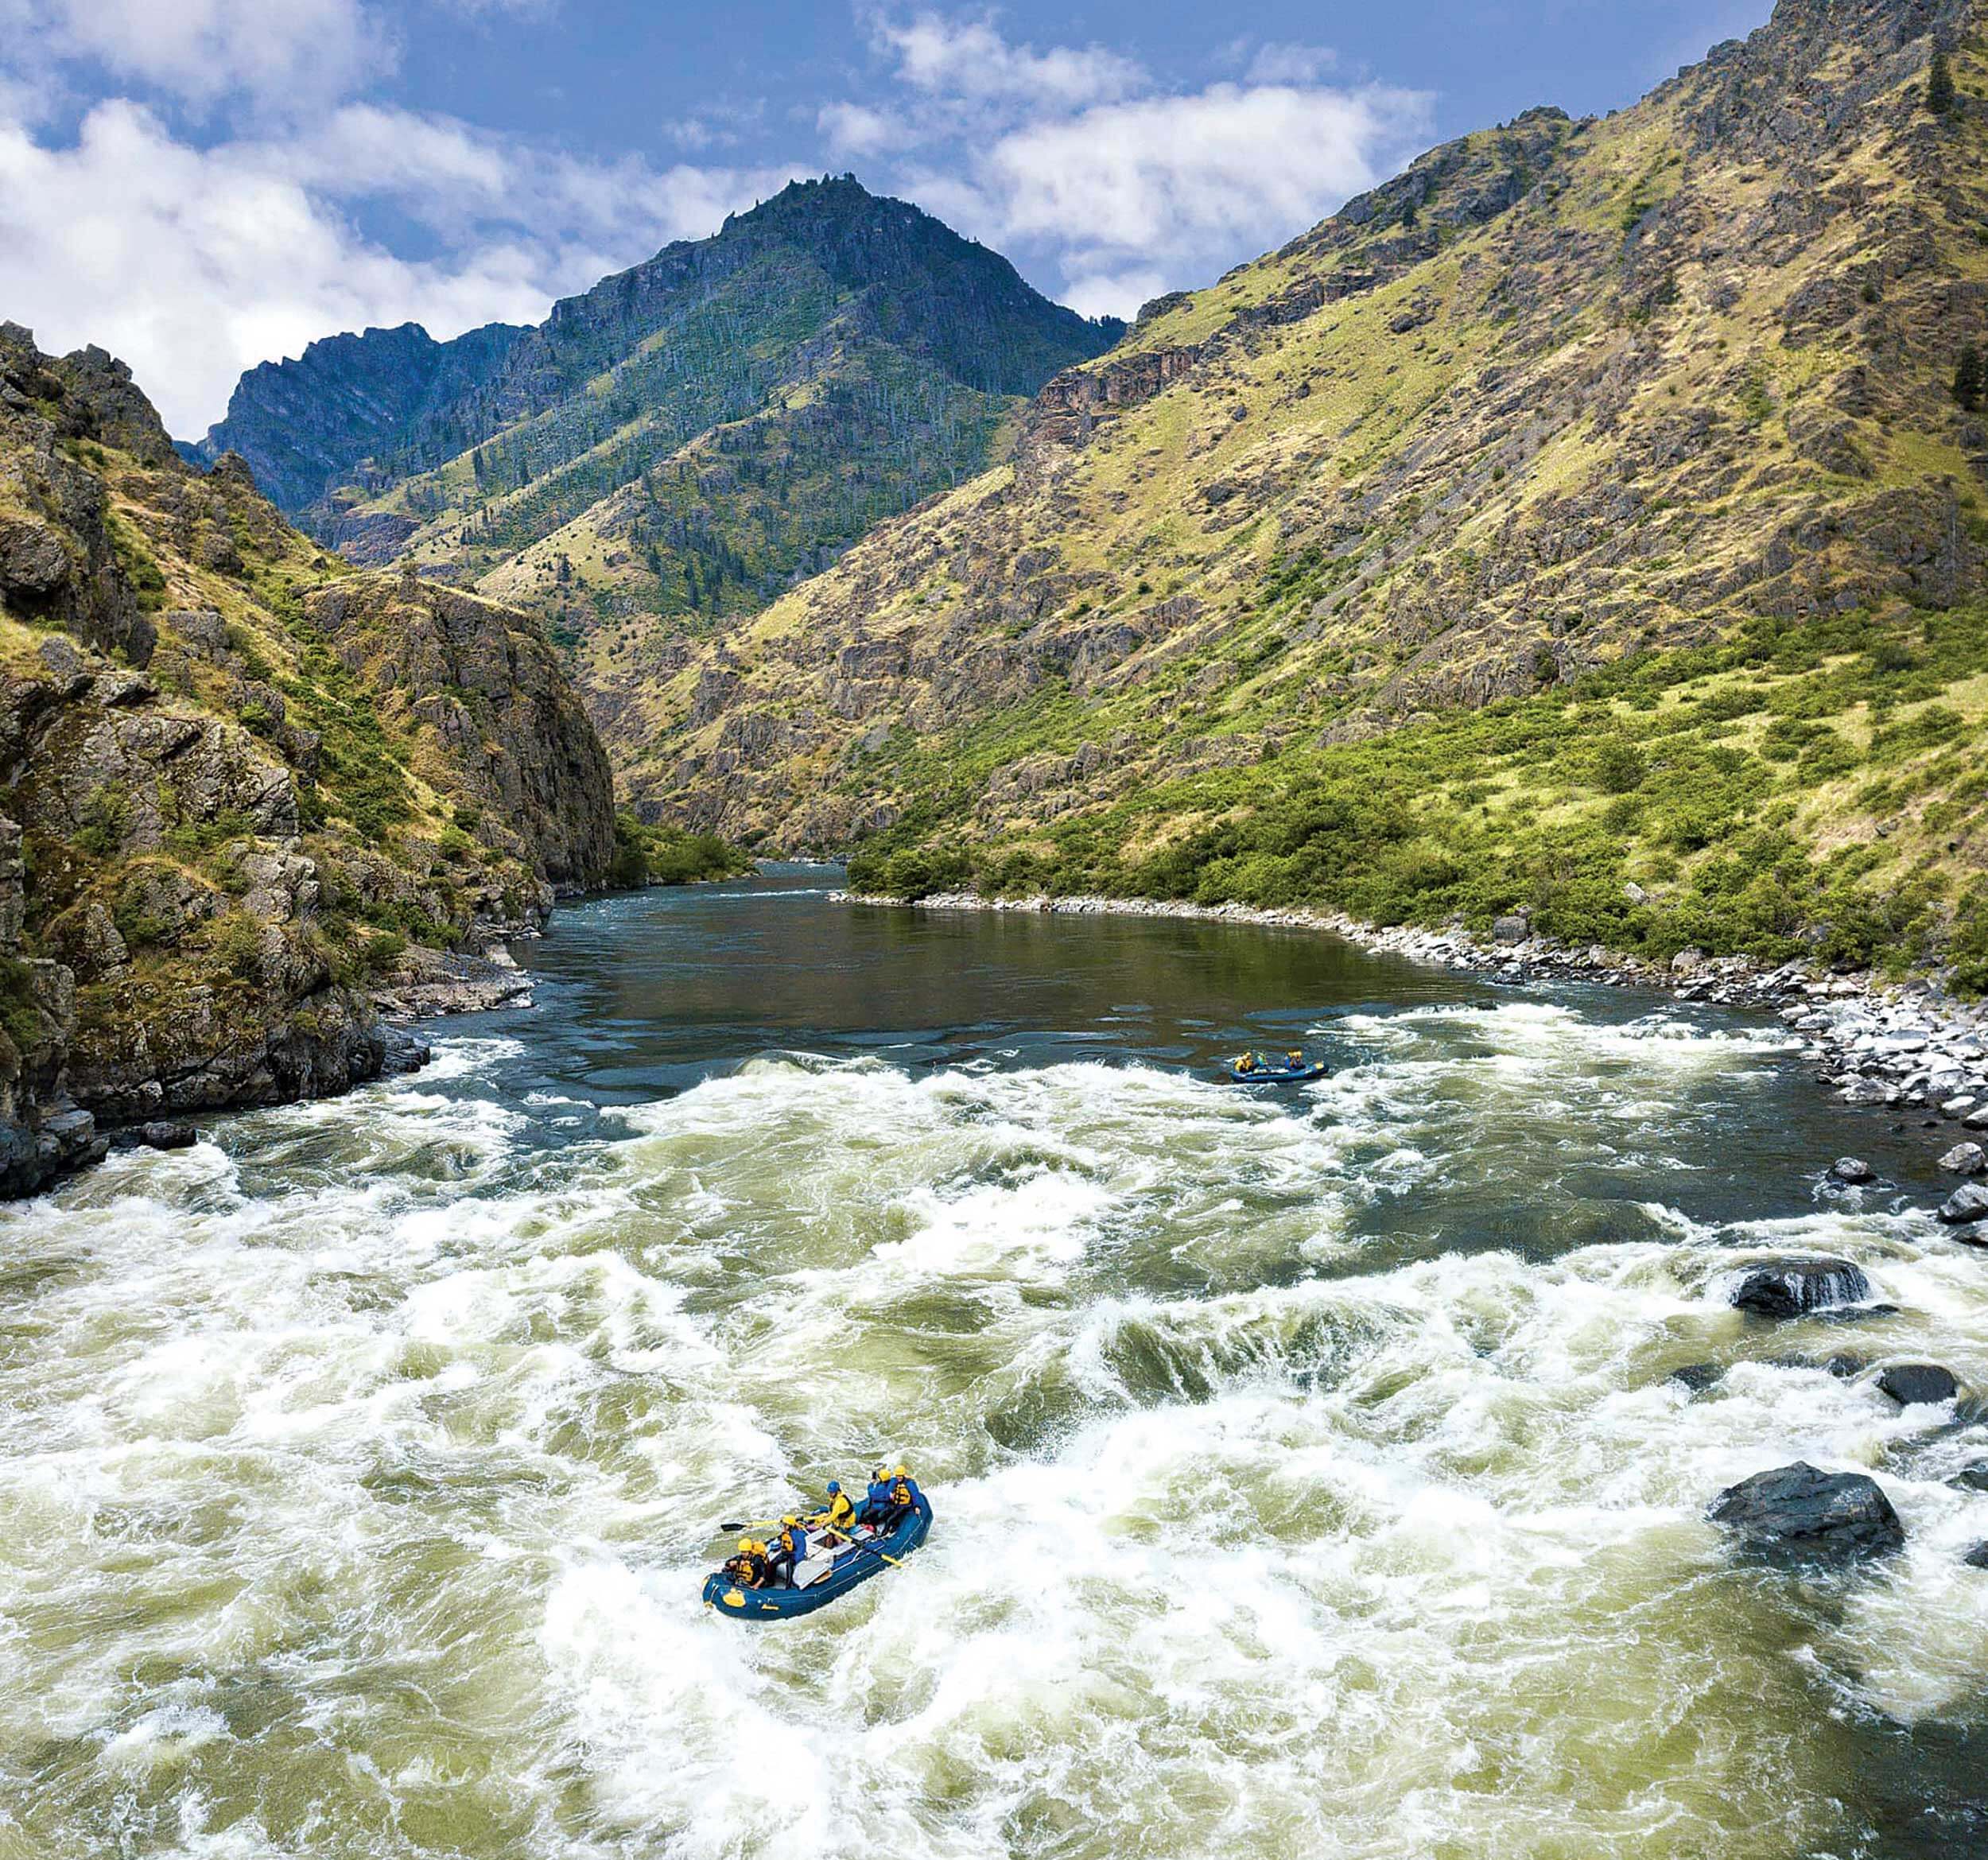 a group of people whitewater rafting on a river within a canyon